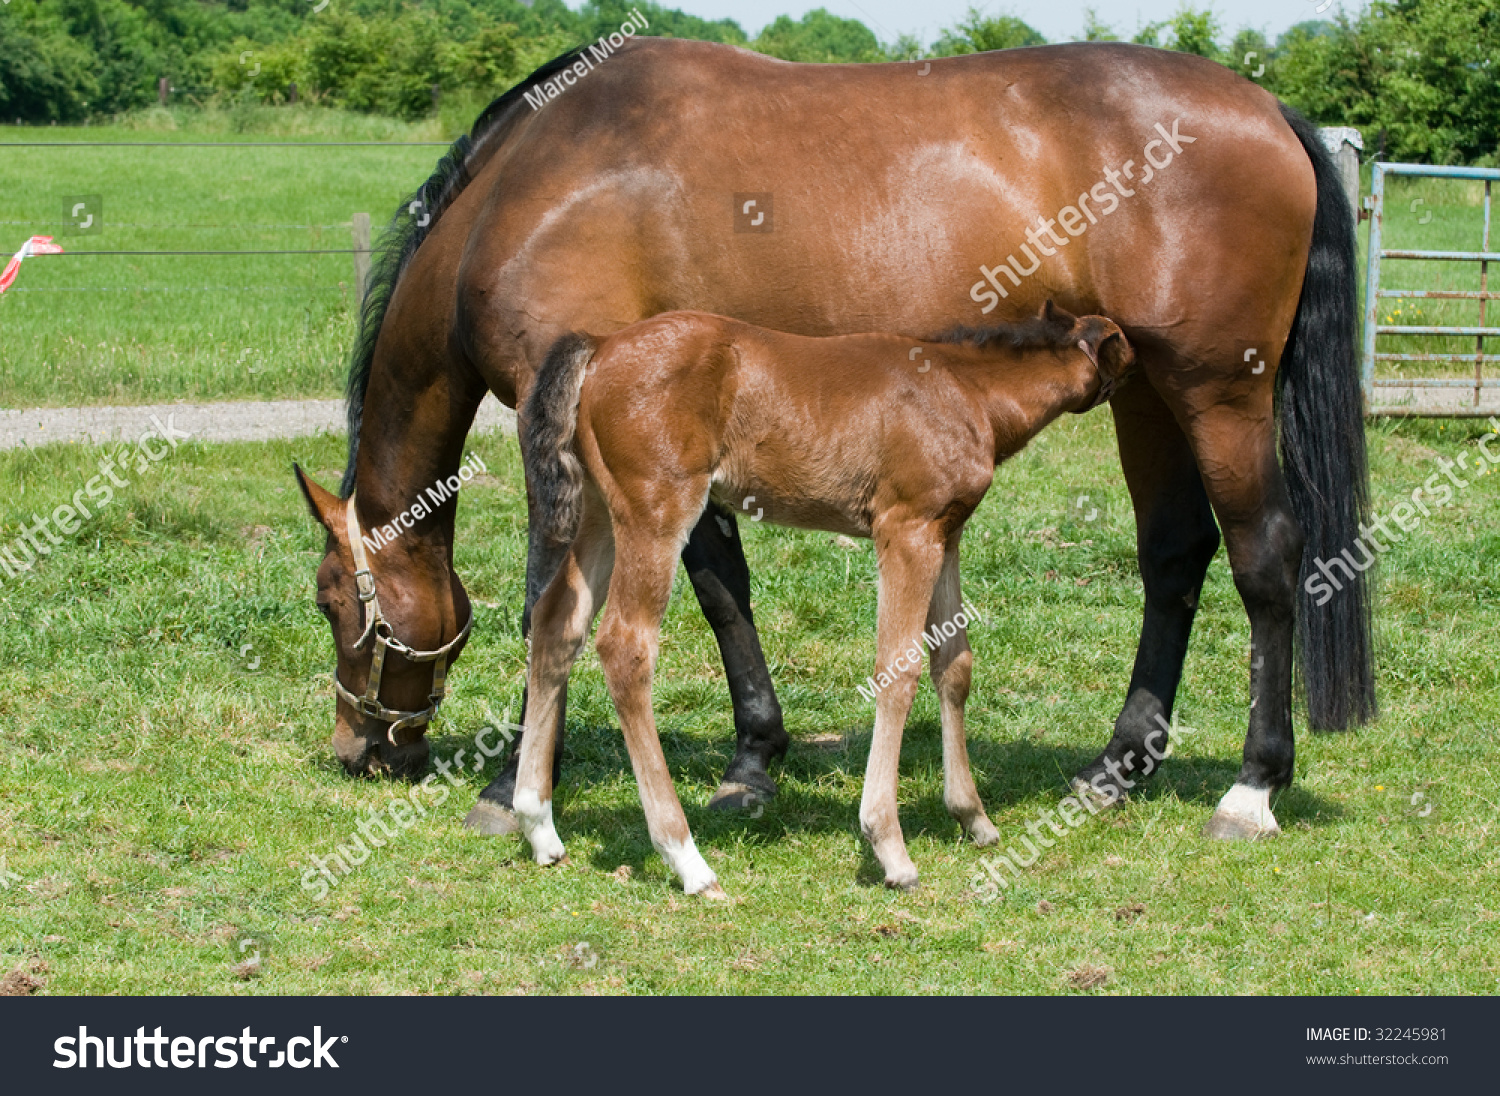 Young Horse Drinking Milk His Mother Stock Photo 32245981 - Shutterstock